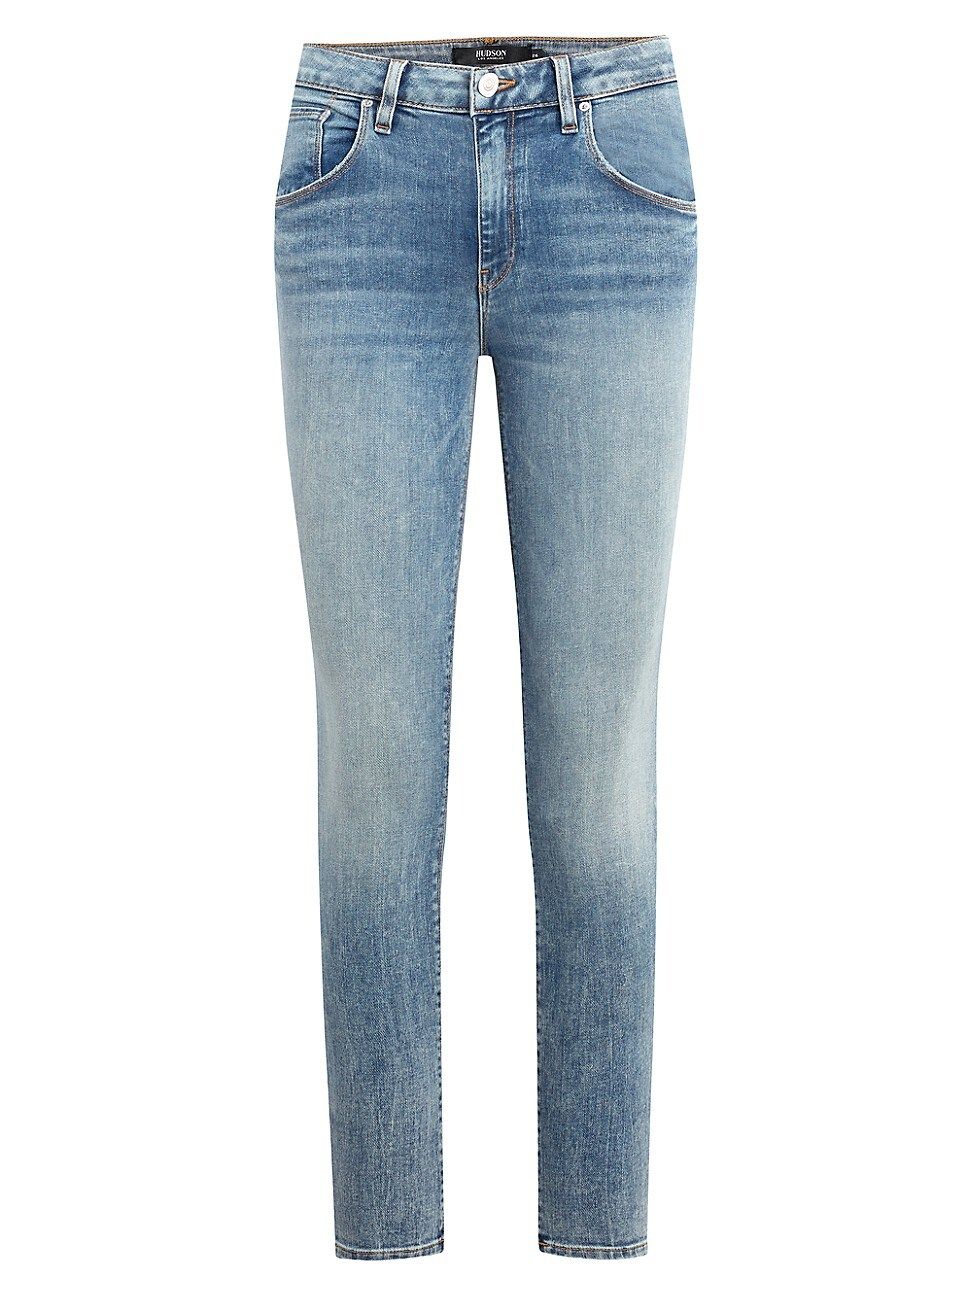 Hudson Women's Barbara High-Rise Super Skinny Jeans - Moving On - Size 24 | Saks Fifth Avenue